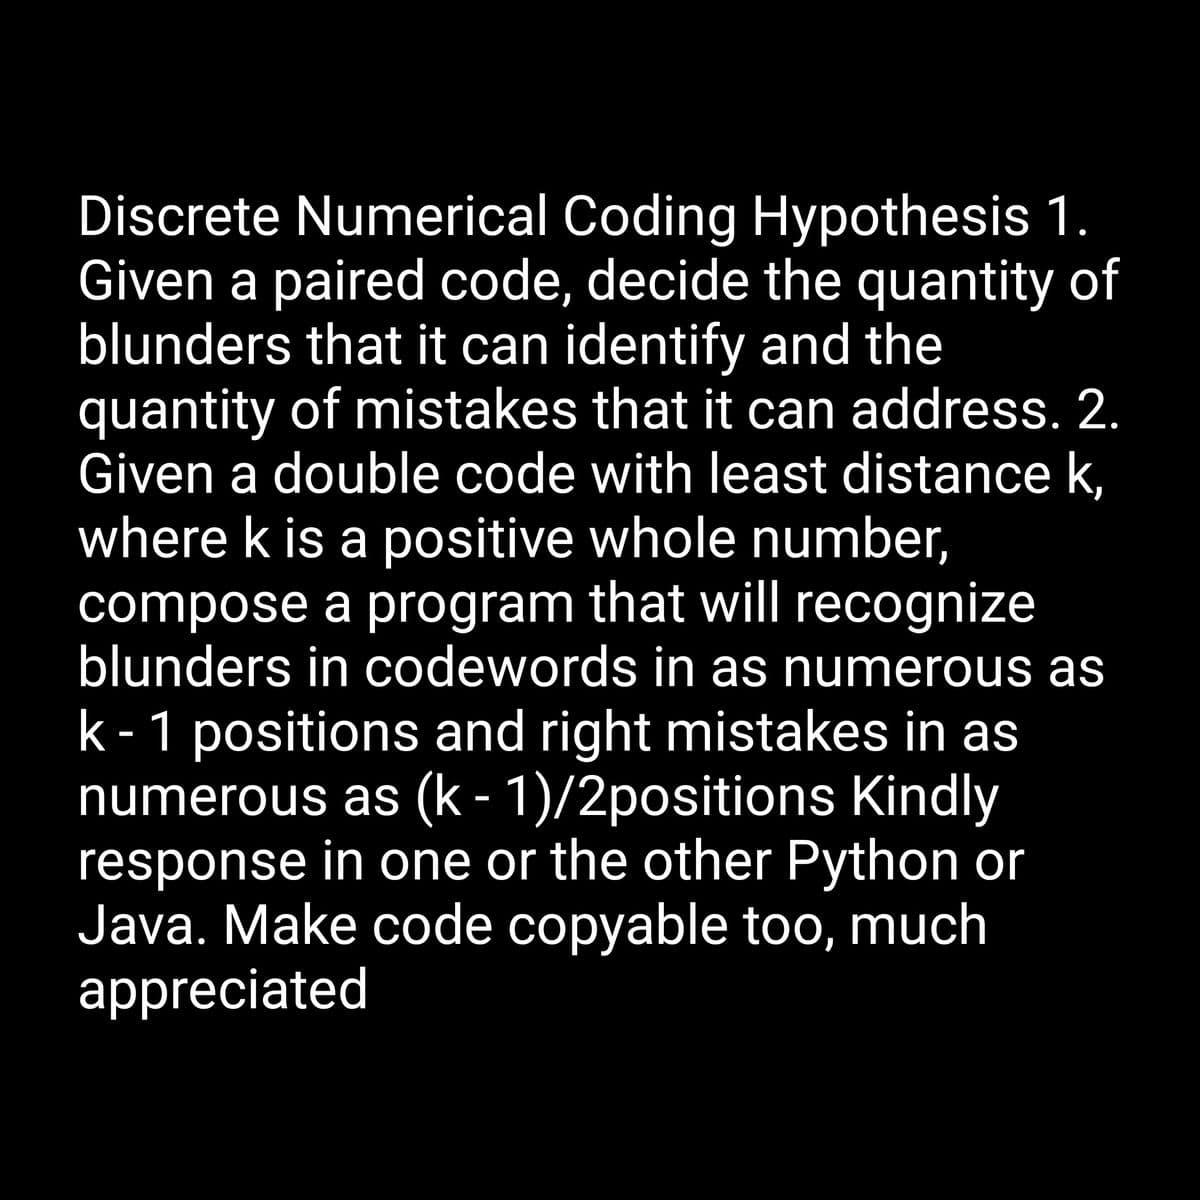 Discrete Numerical Coding Hypothesis 1.
Given a paired code, decide the quantity of
blunders that it can identify and the
quantity of mistakes that it can address. 2.
Given a double code with least distance k,
where k is a positive whole number,
compose a program that will recognize
blunders in codewords in as numerous as
k- 1 positions and right mistakes in as
numerous as (k - 1)/2positions Kindly
response in one or the other Python or
Java. Make code copyable too, much
appreciated